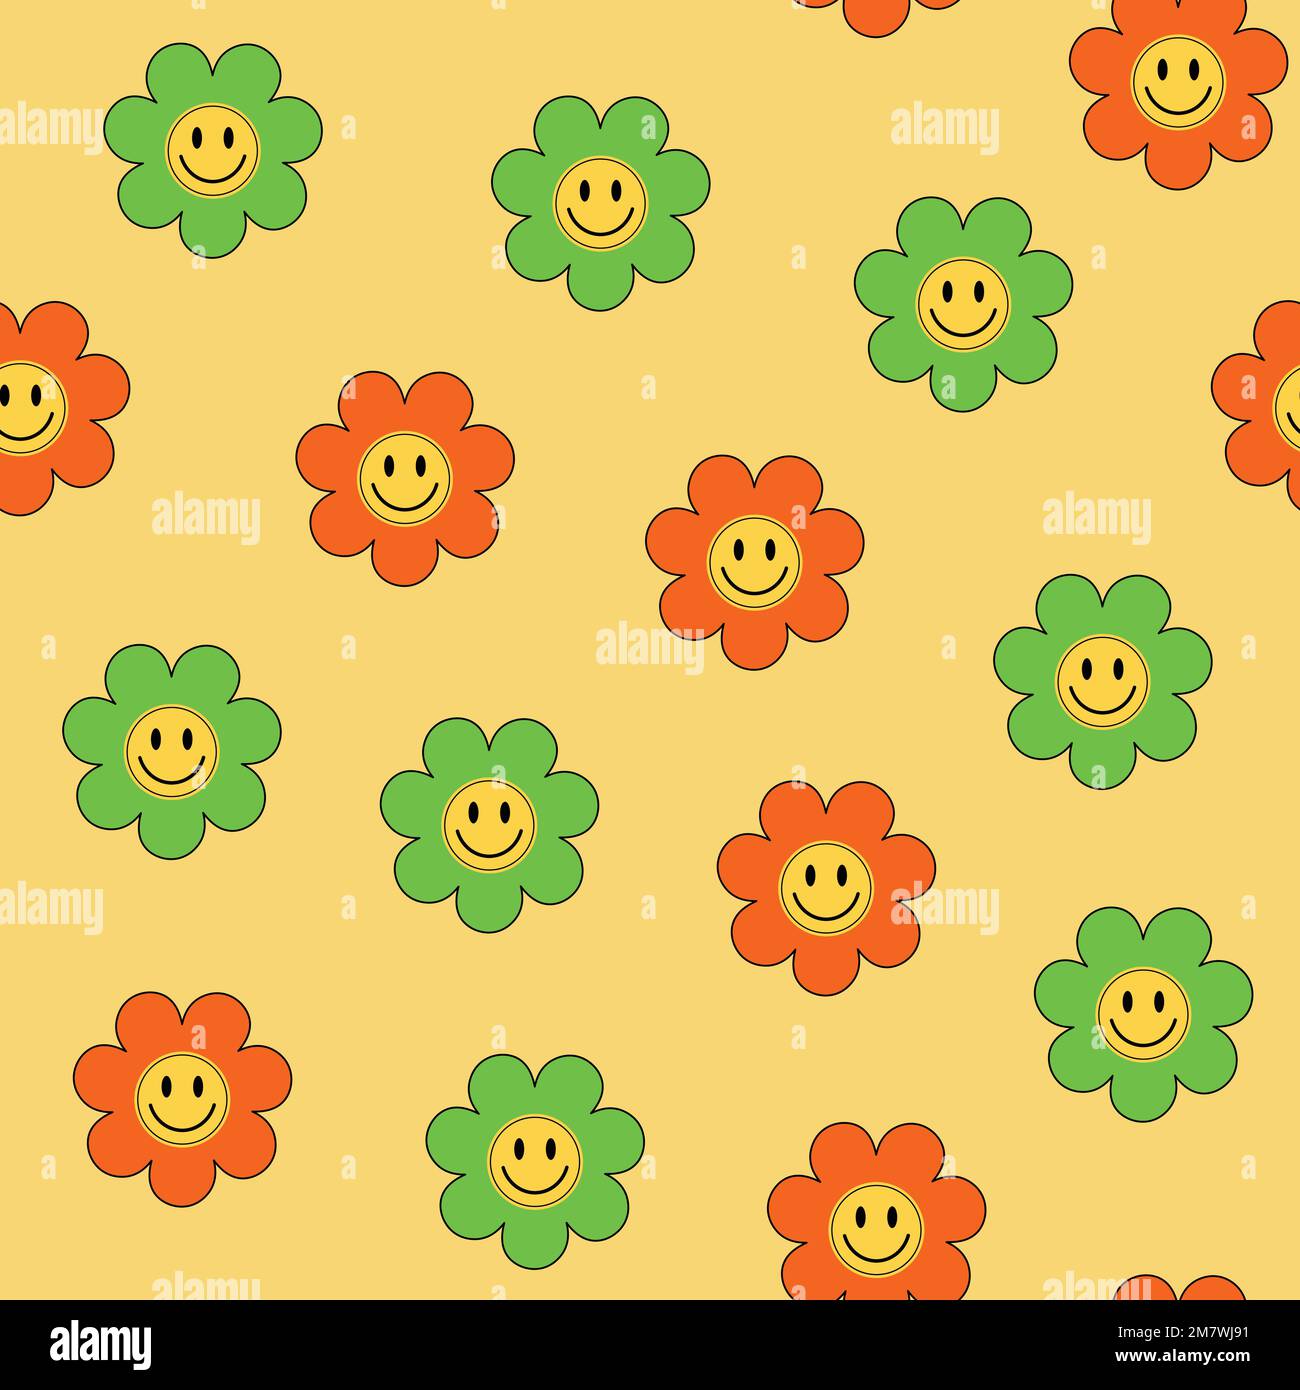 Seamless pattern retro y2k style colored with smiling flowers green and orange acid colors. Stock Vector